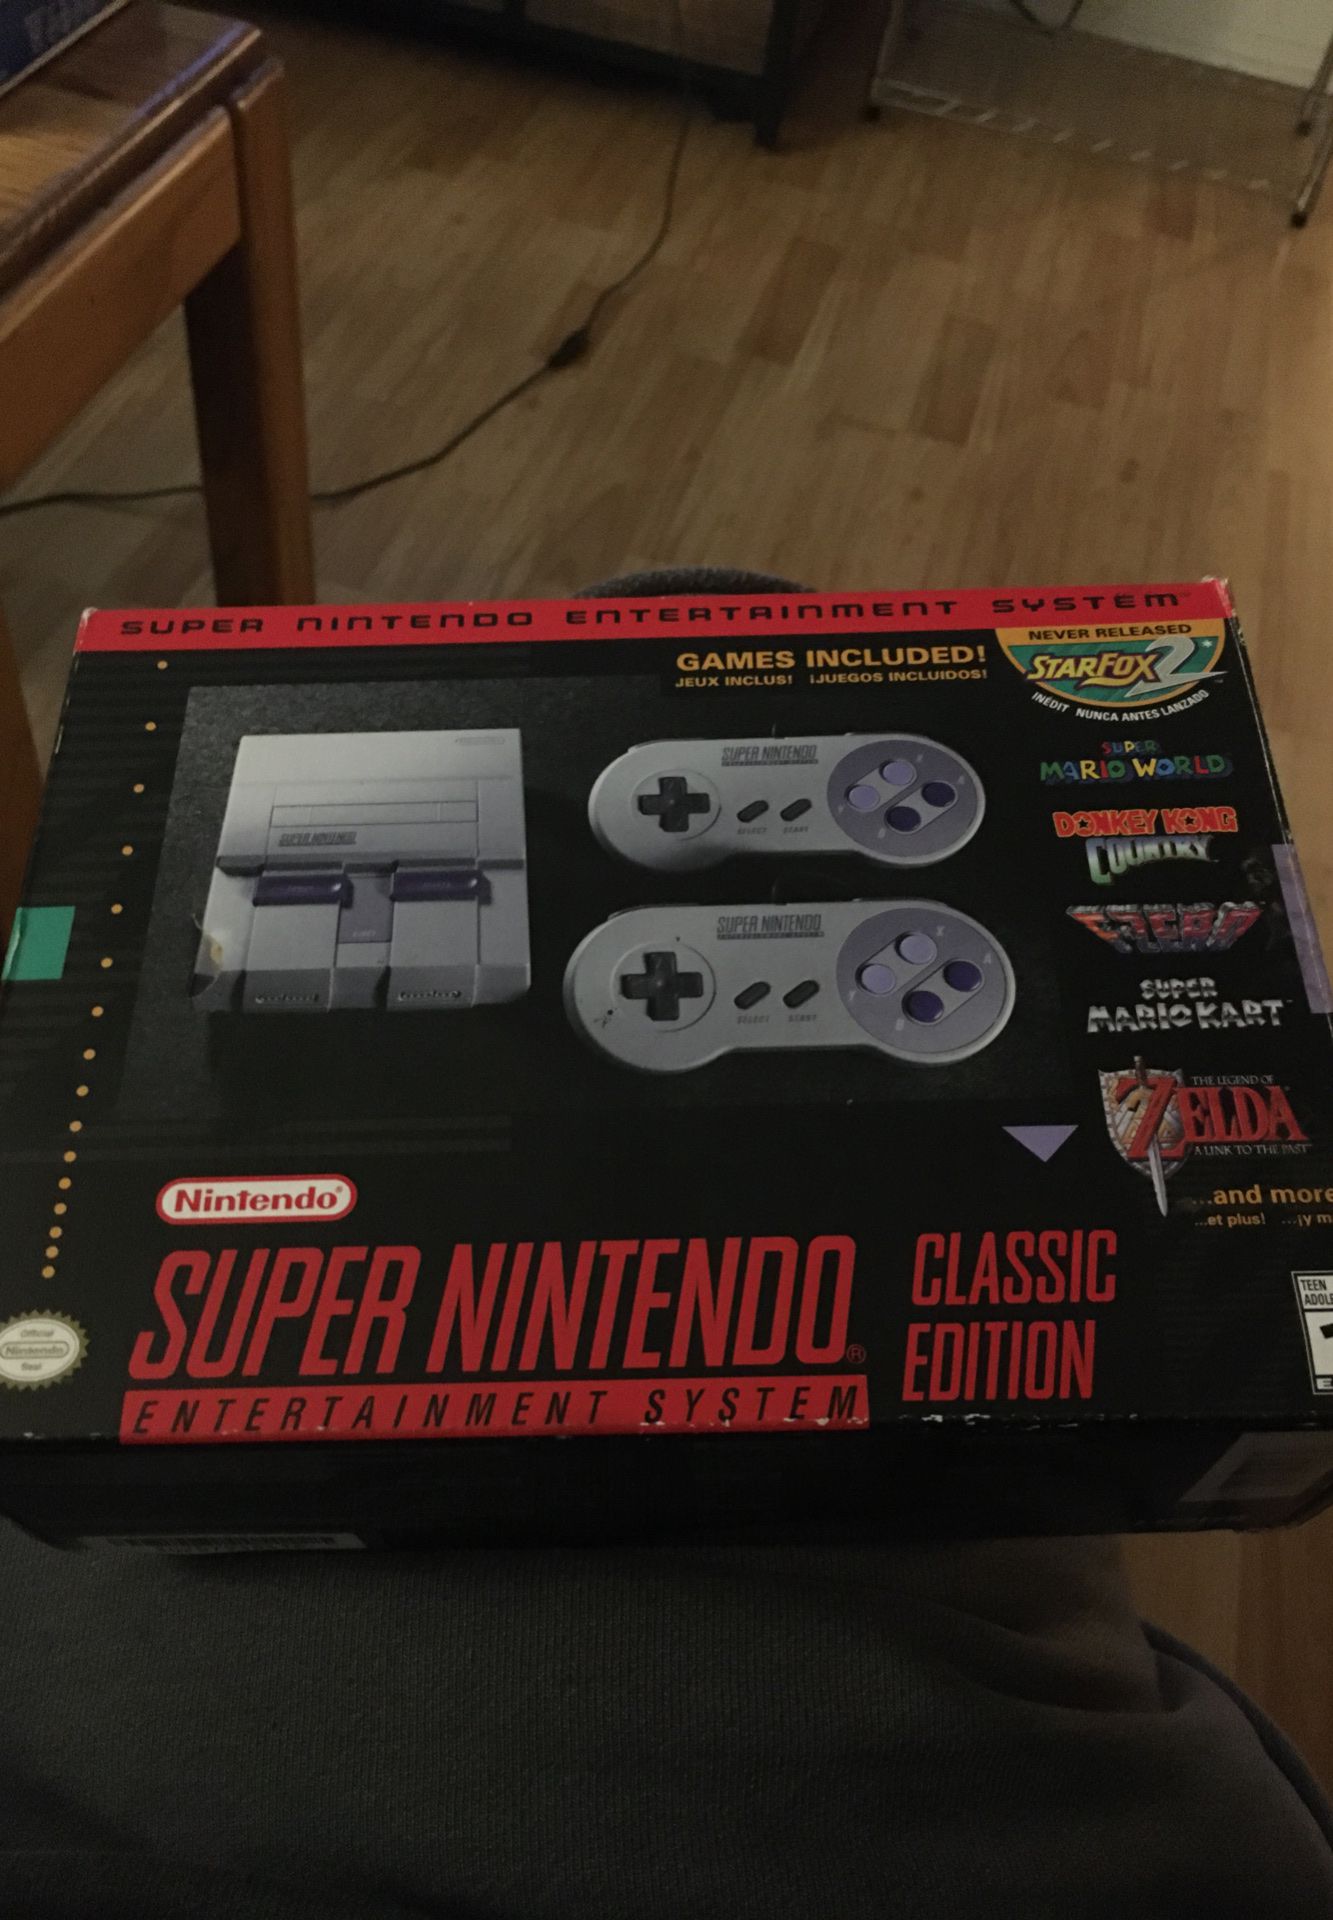 Snes classic mod 123 games, price is firm.